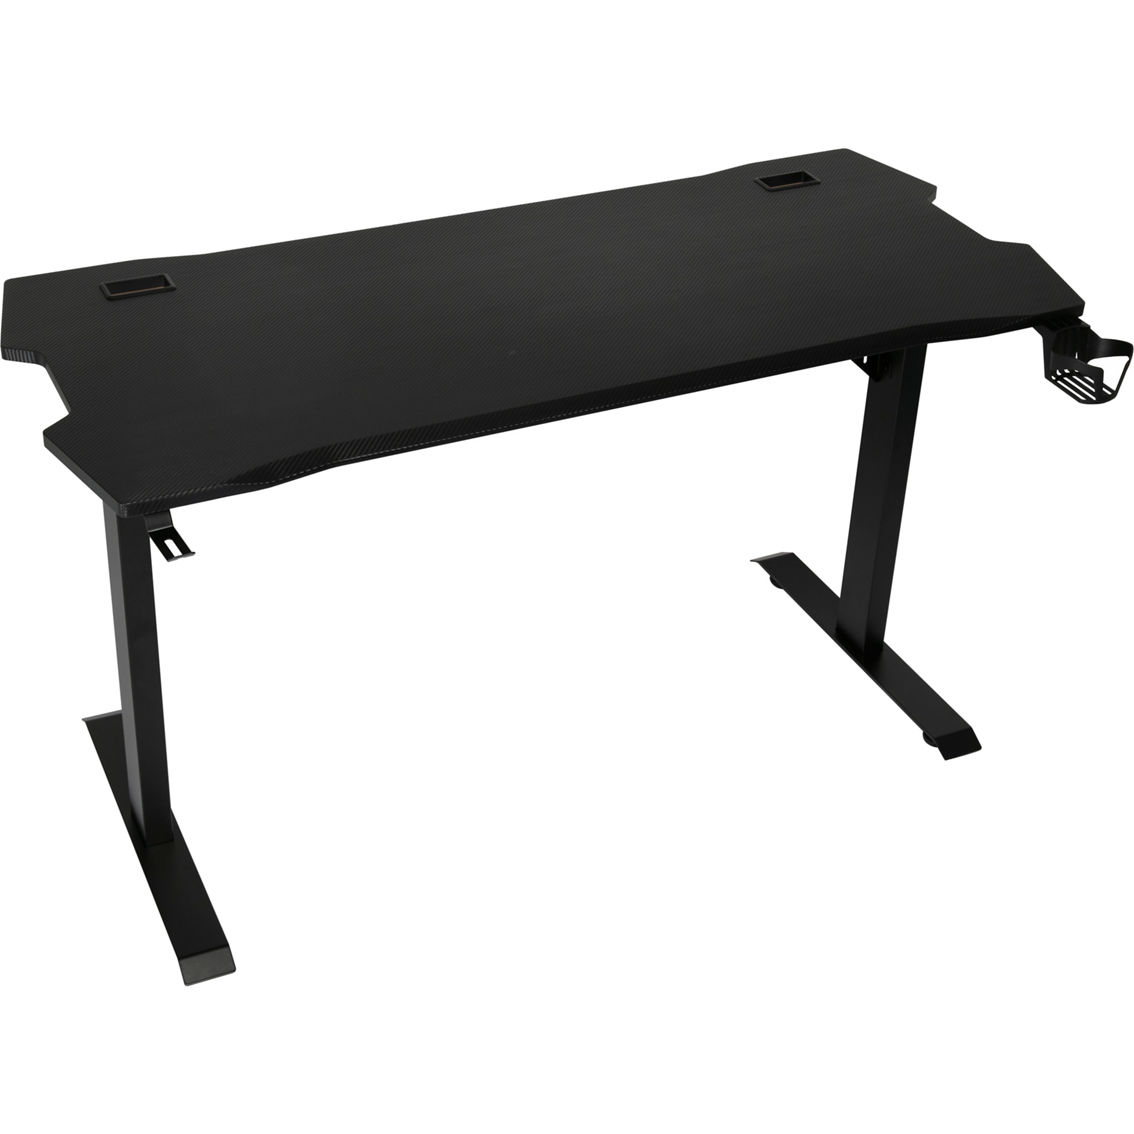 Simply Perfect 55 in. Ergonomic Home Office Computer Gaming Desk - Image 2 of 5